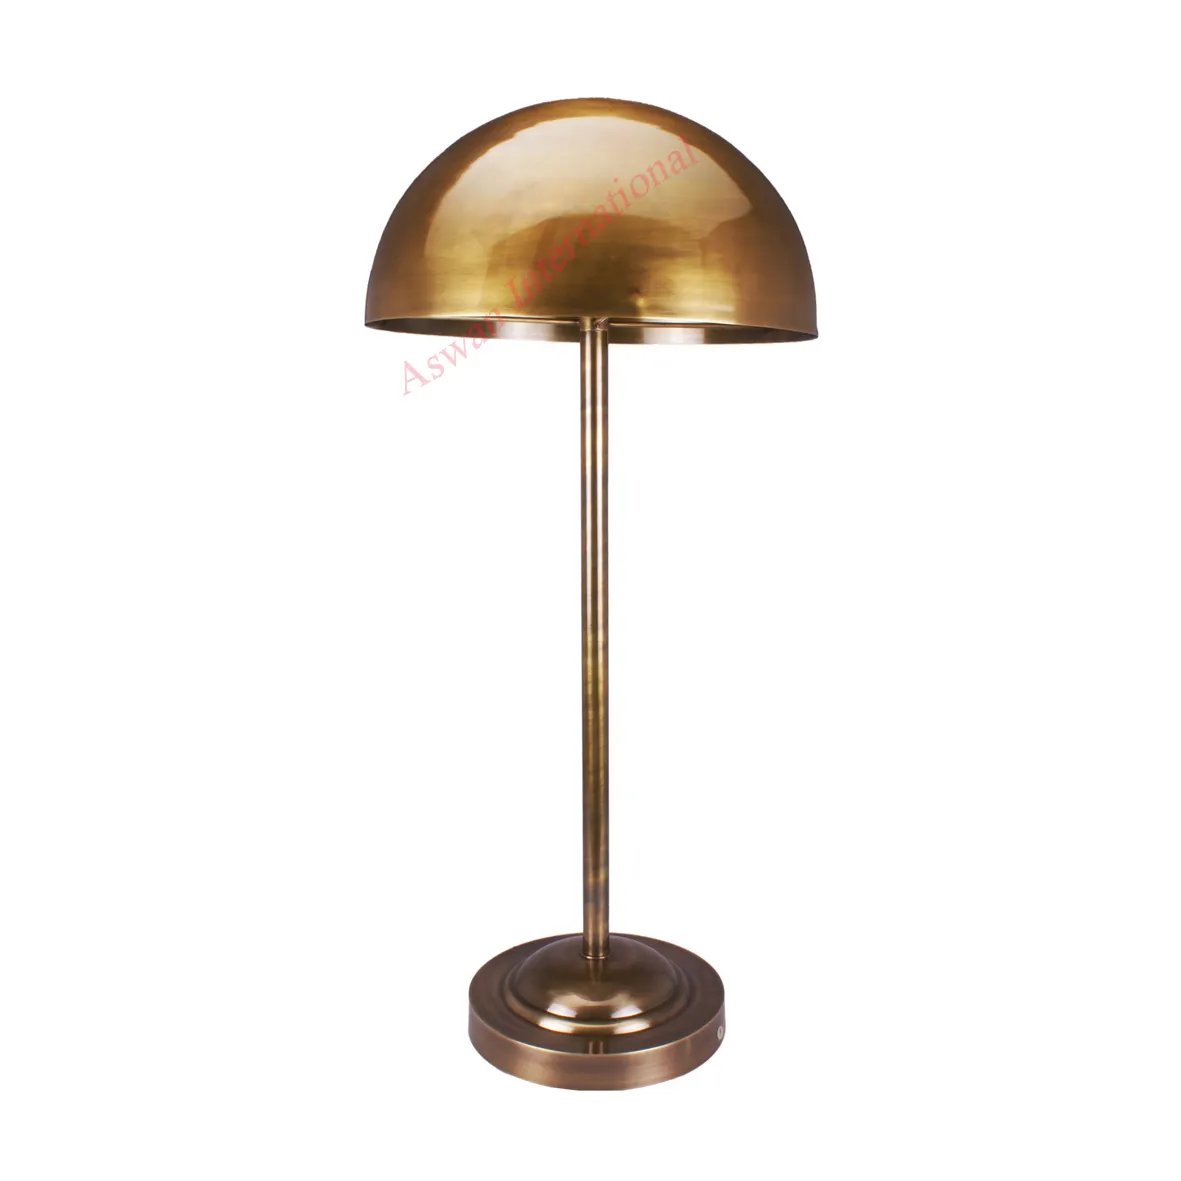 Mushroom table lamp study living room bedroom bedside lamp Nordic personality decorative table lamp